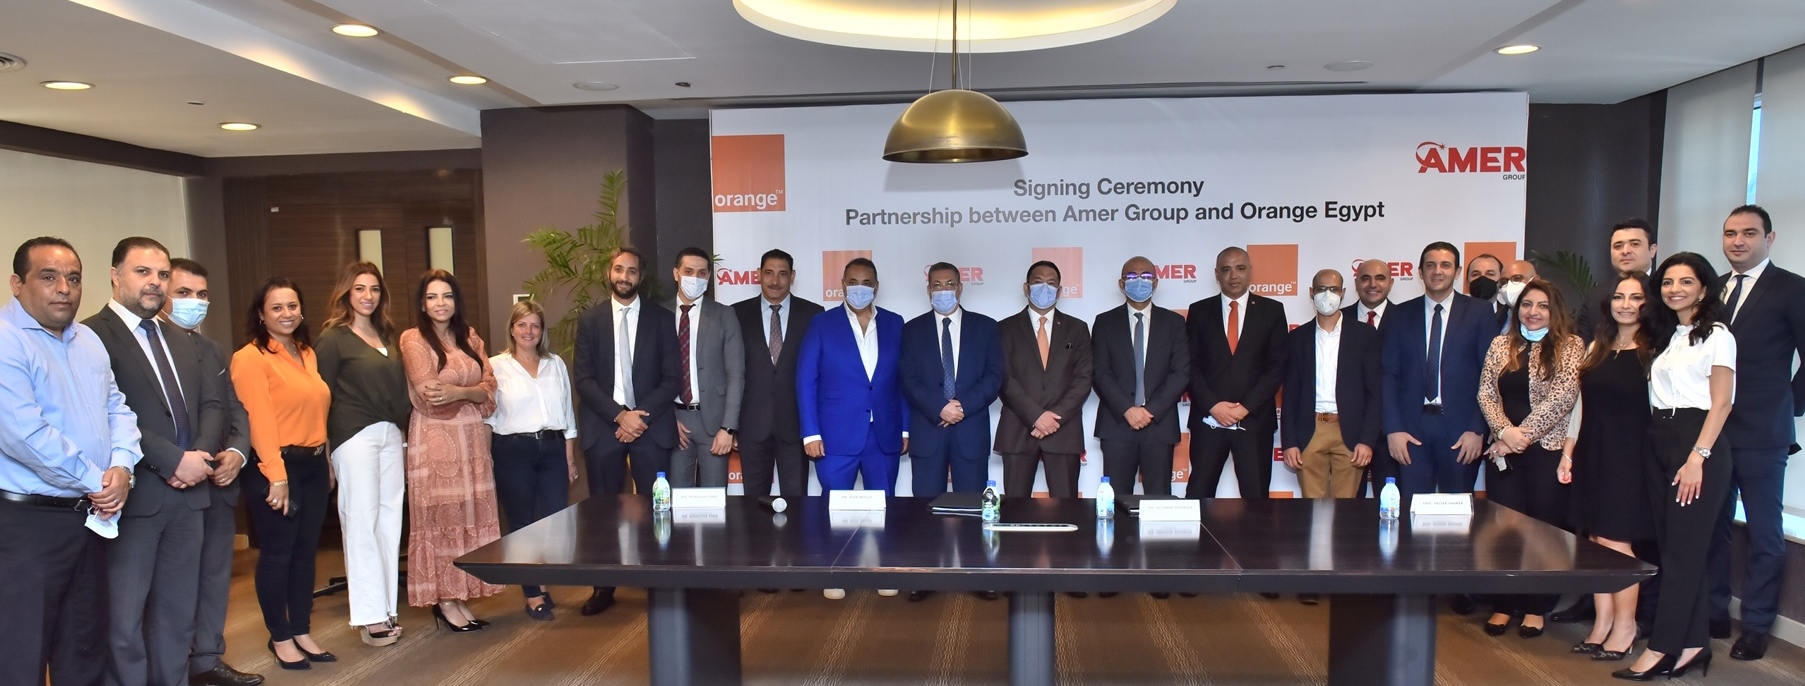 After 10 years of successful cooperation, Orange Egypt signs a partnership renewal agreement with Amer Group